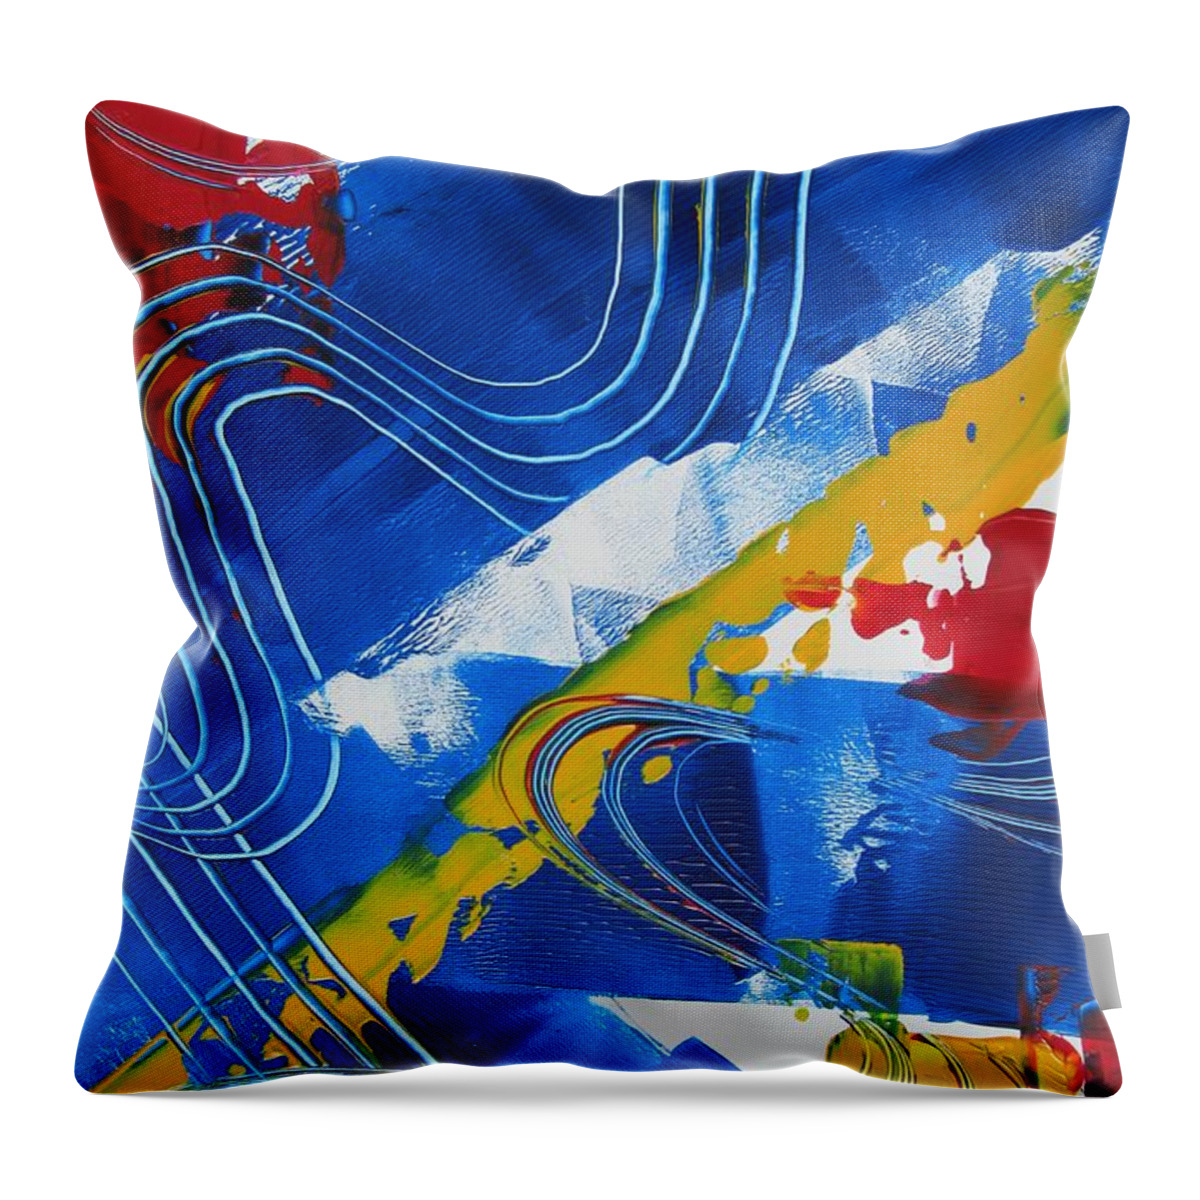 Primary Colours Throw Pillow featuring the painting Primary Rhapsody One by Louise Adams